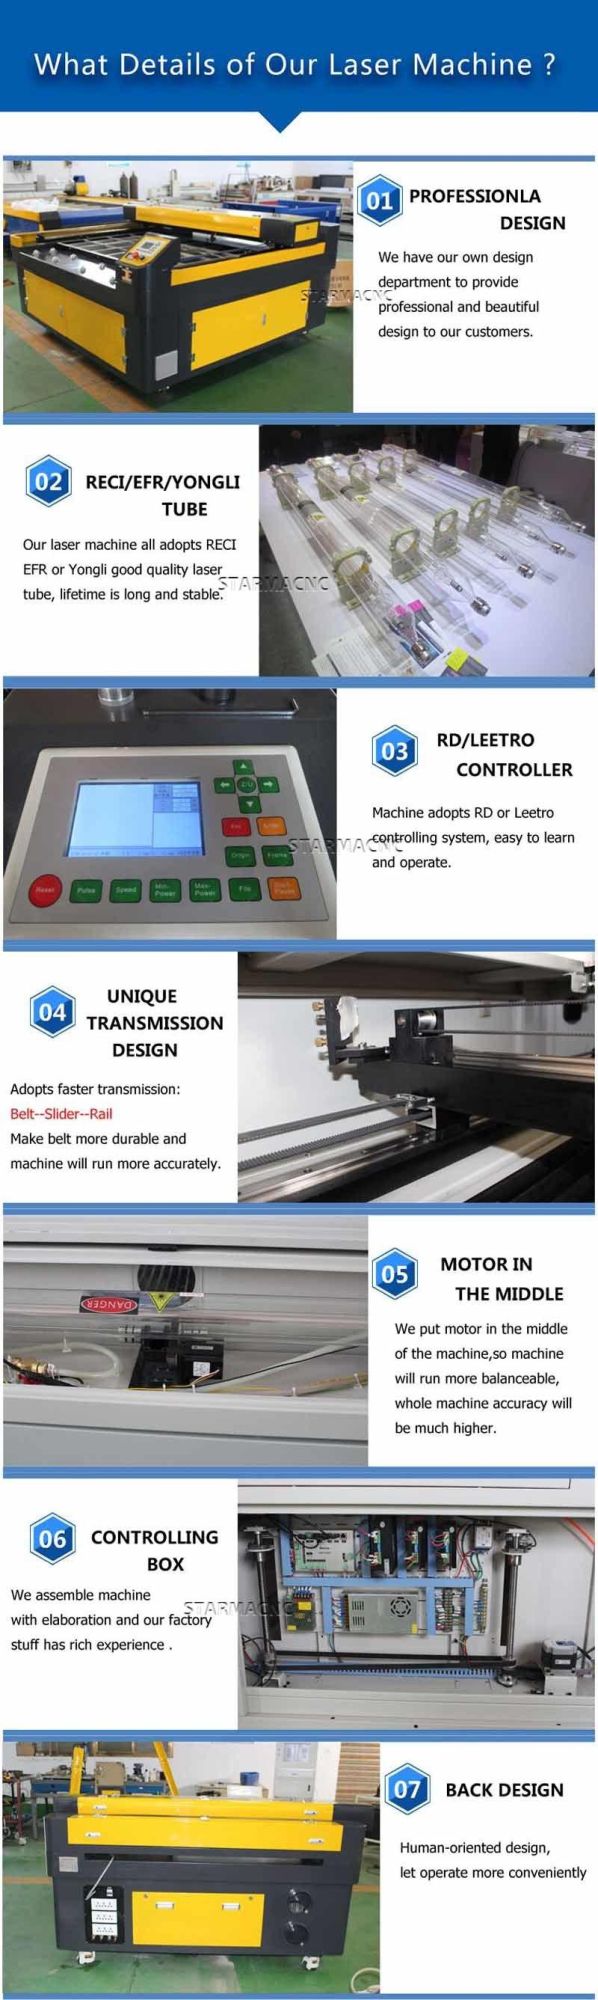 Jinan 220W CNC CO2 Laser Cutting Machine with Competitive Factory Price